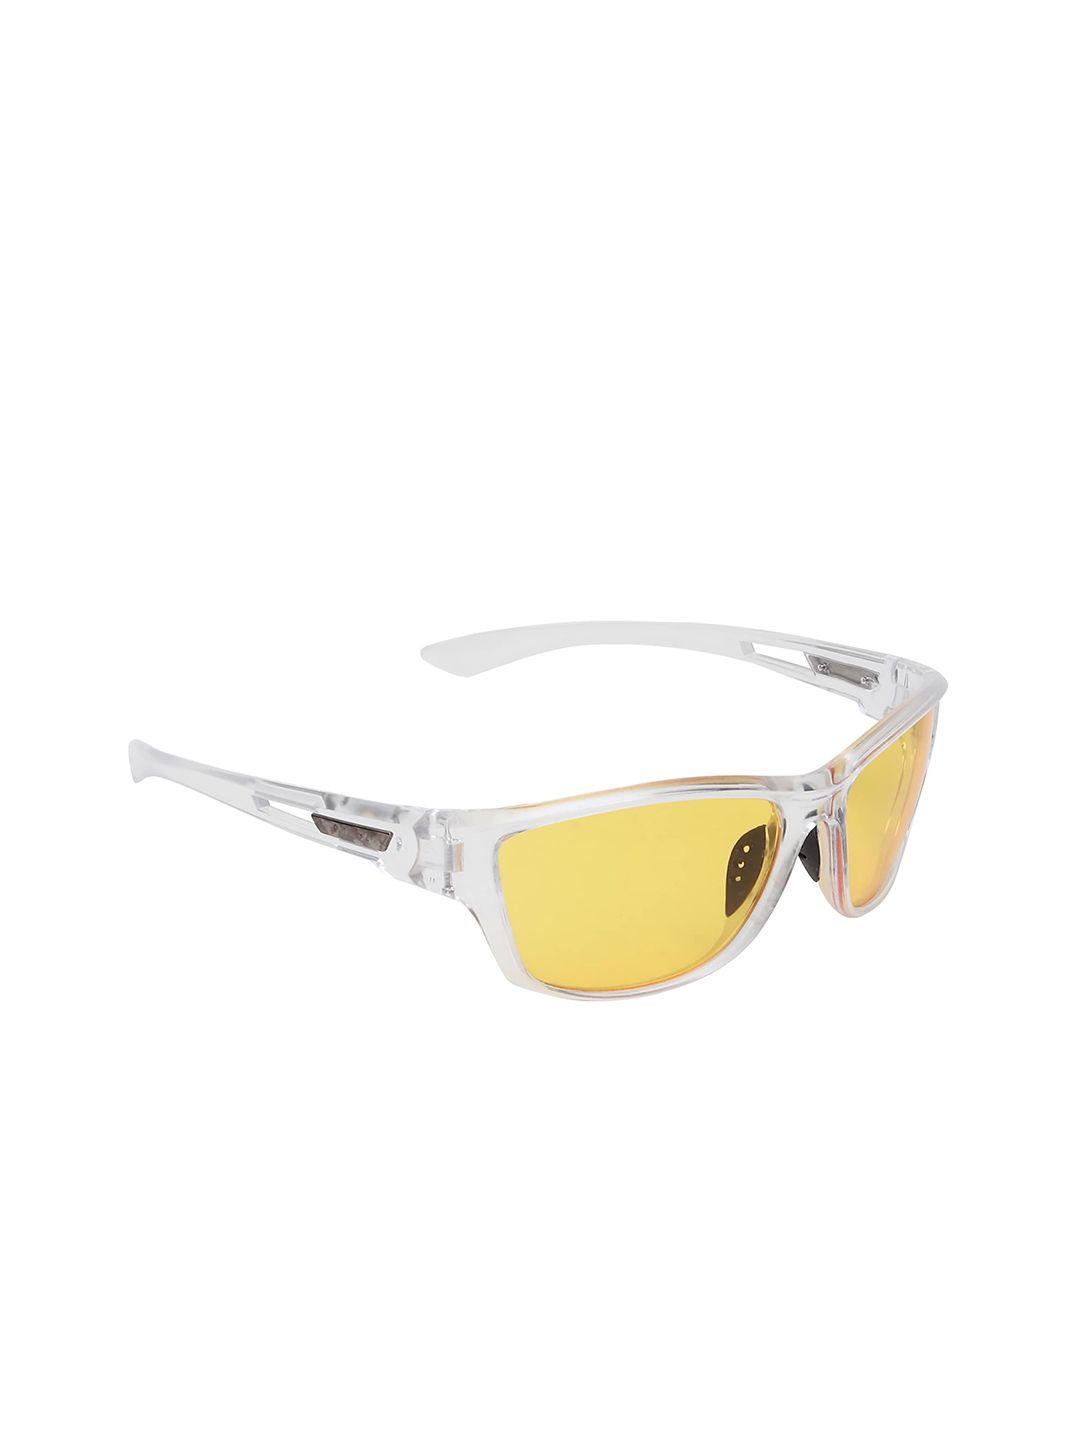 criba sports sunglasses with uv protected lens cr_sprts_wht